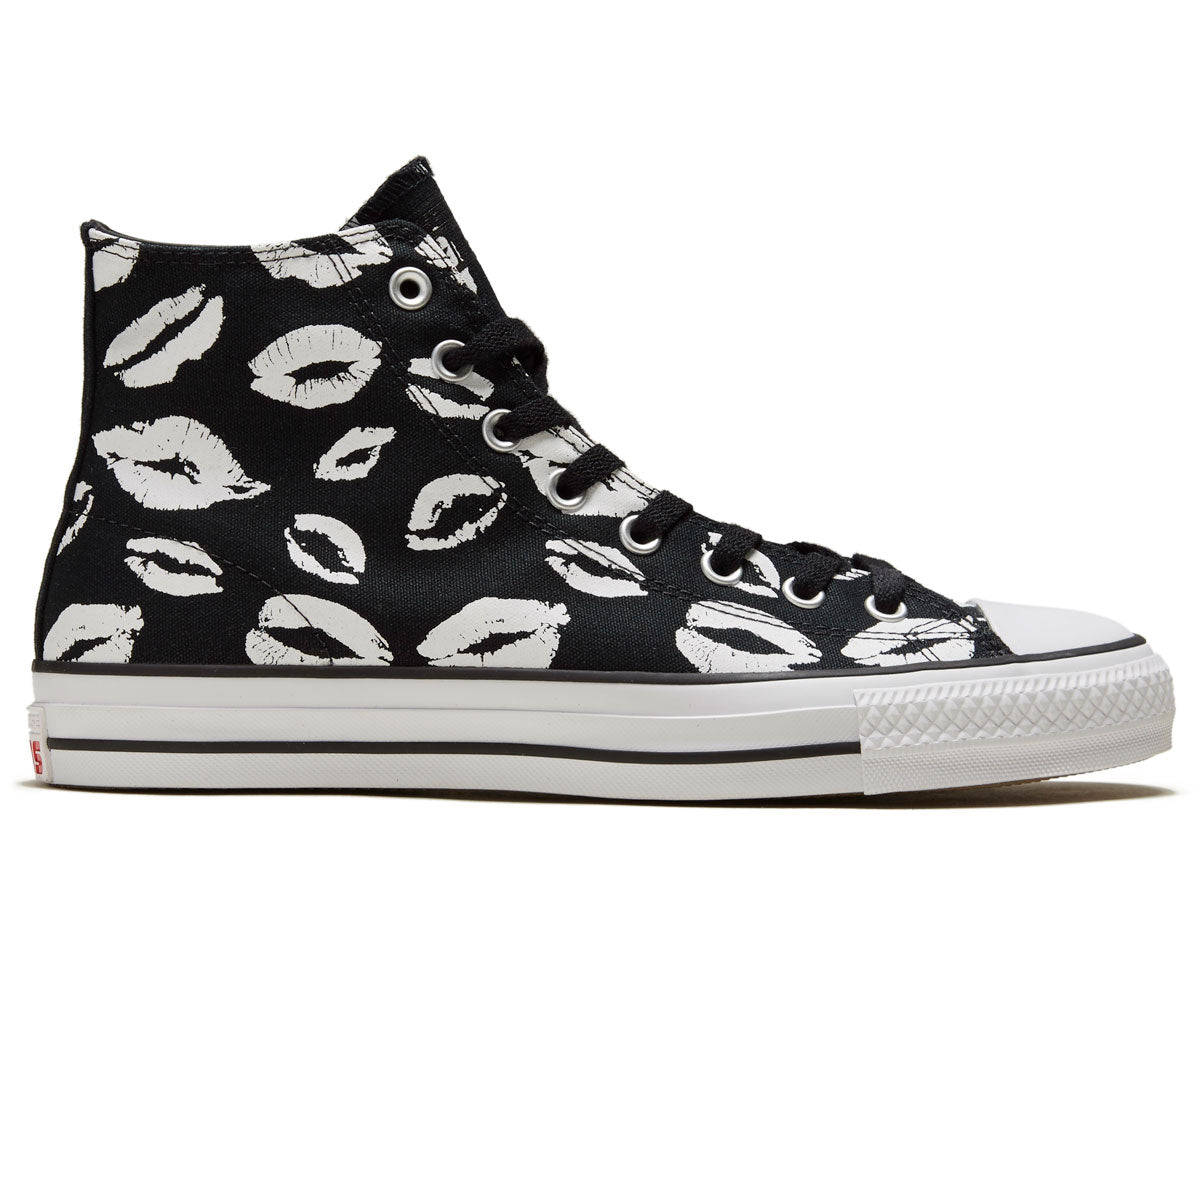 Converse Chuck Taylor All Star Pro Lips Hi Shoes - Black/White/Red – Daddies Board